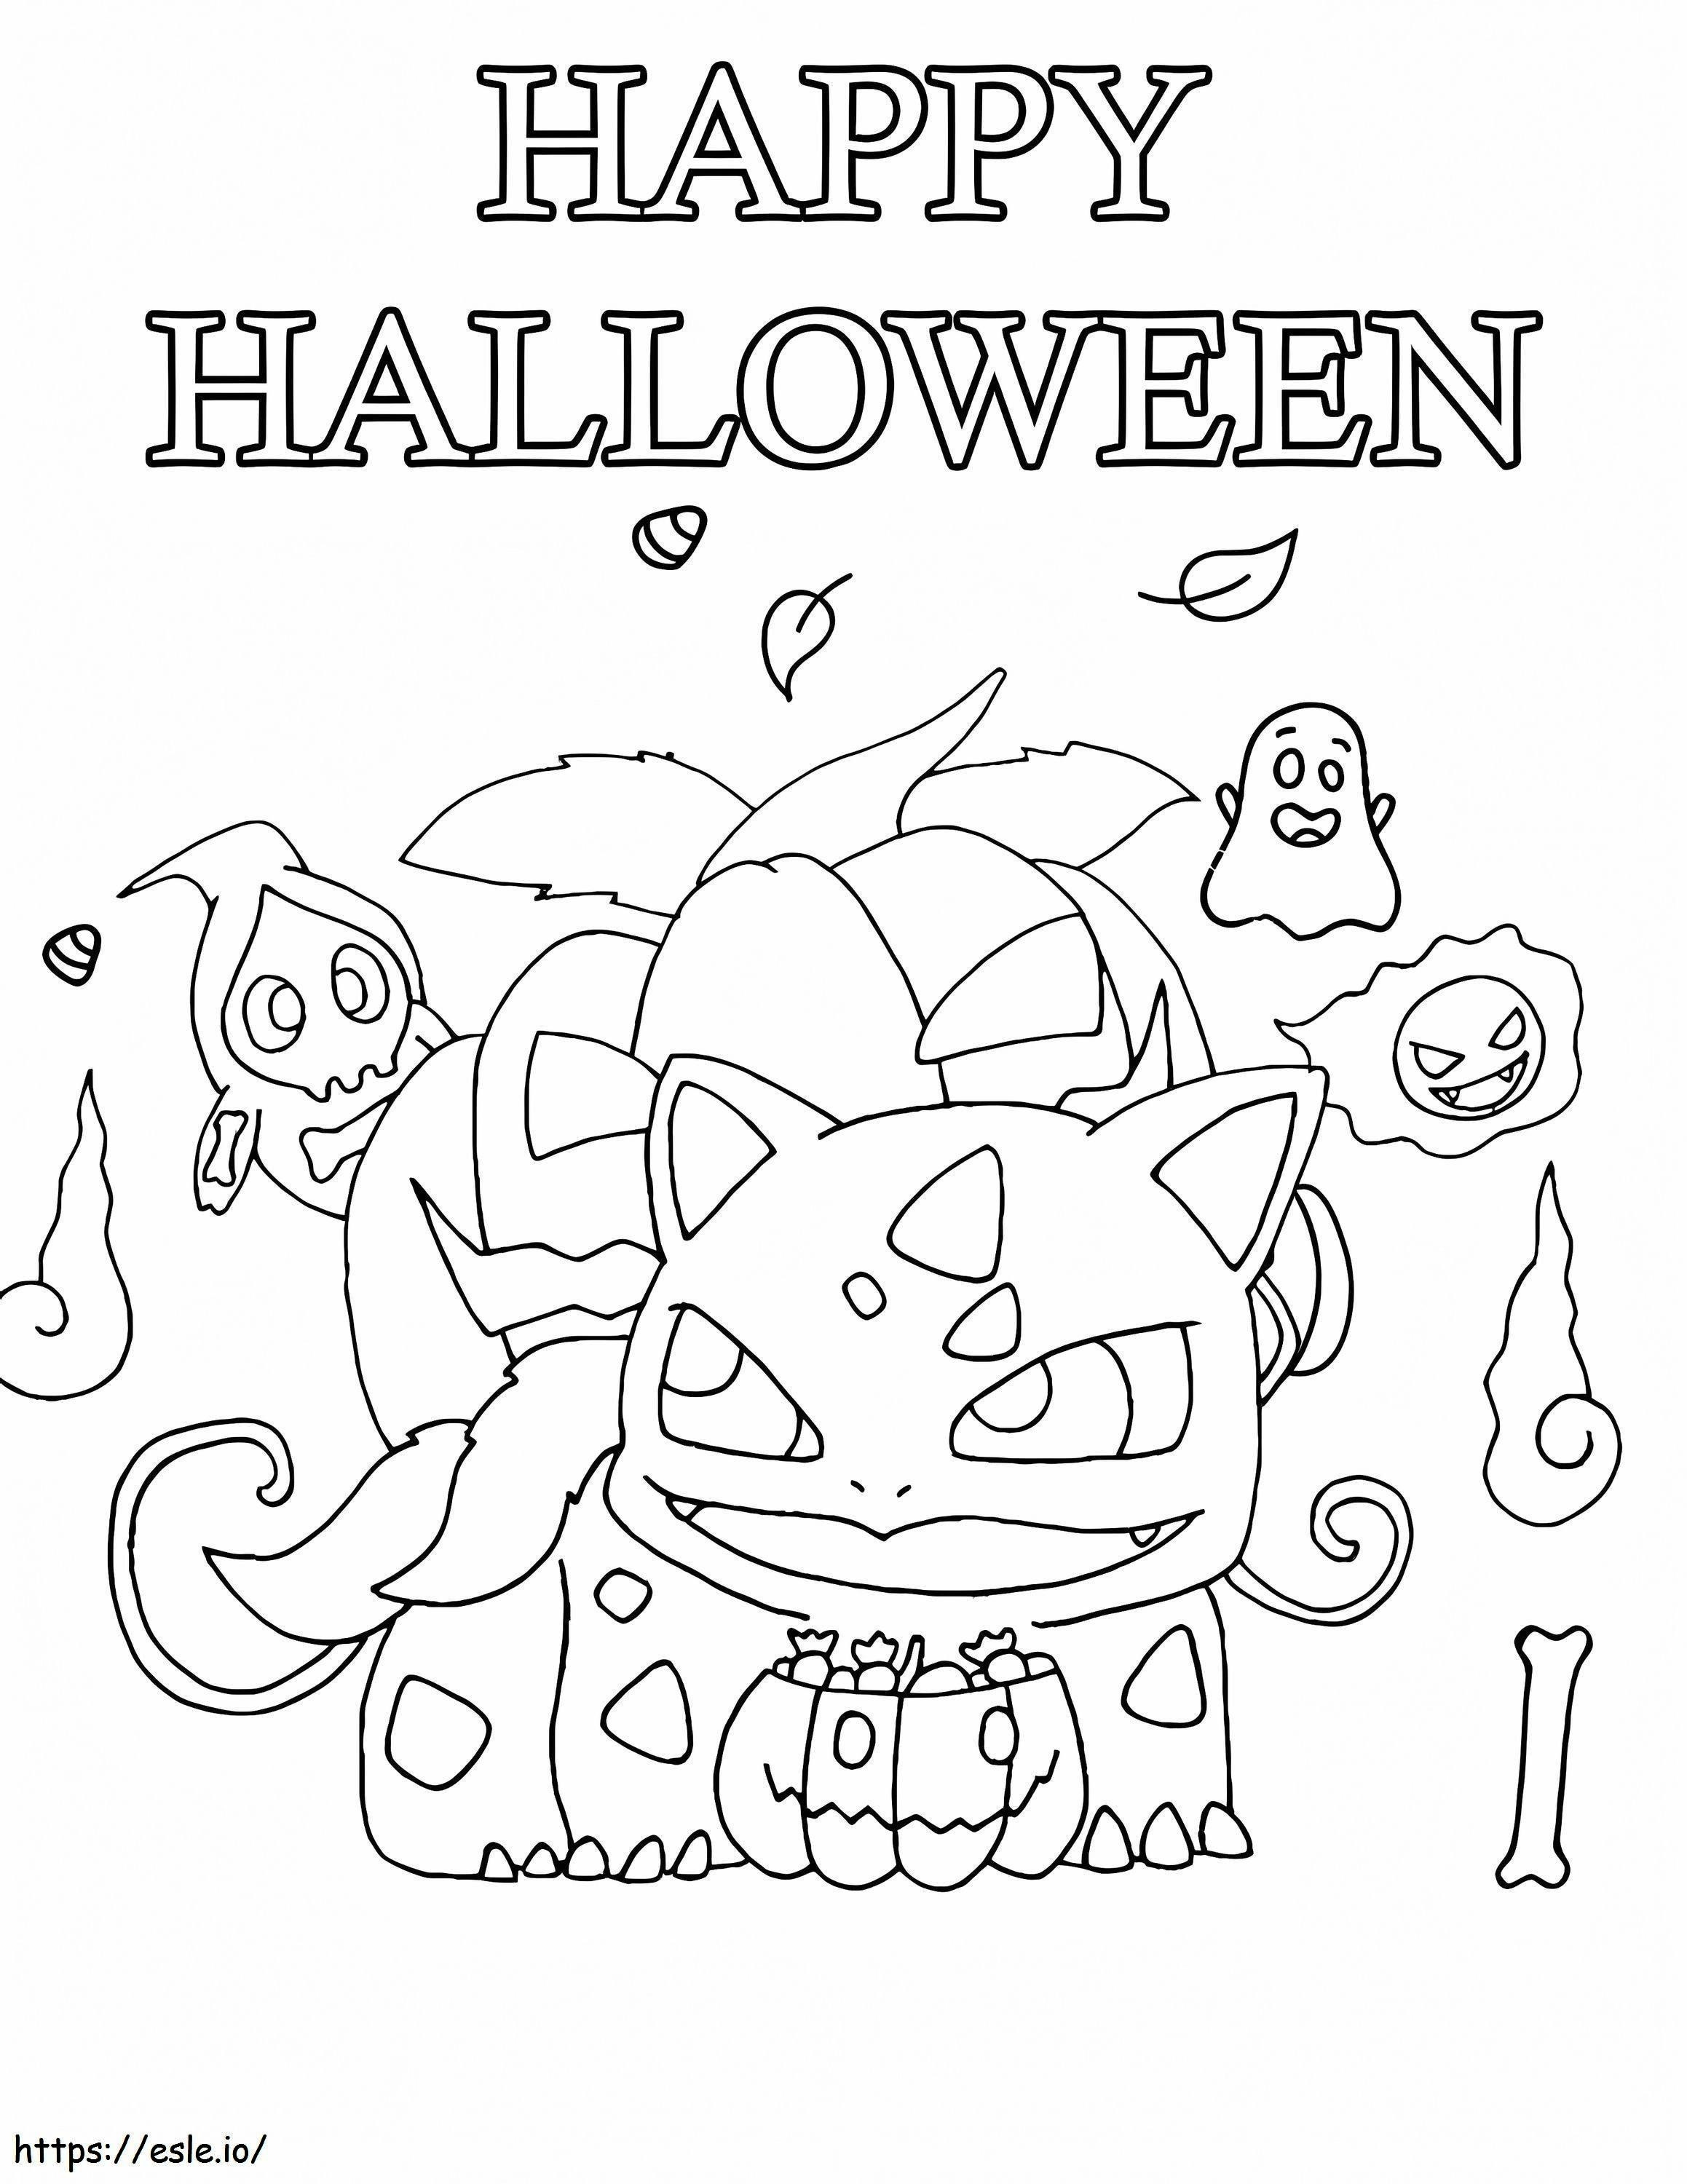 Happy Halloween With Pokemon coloring page